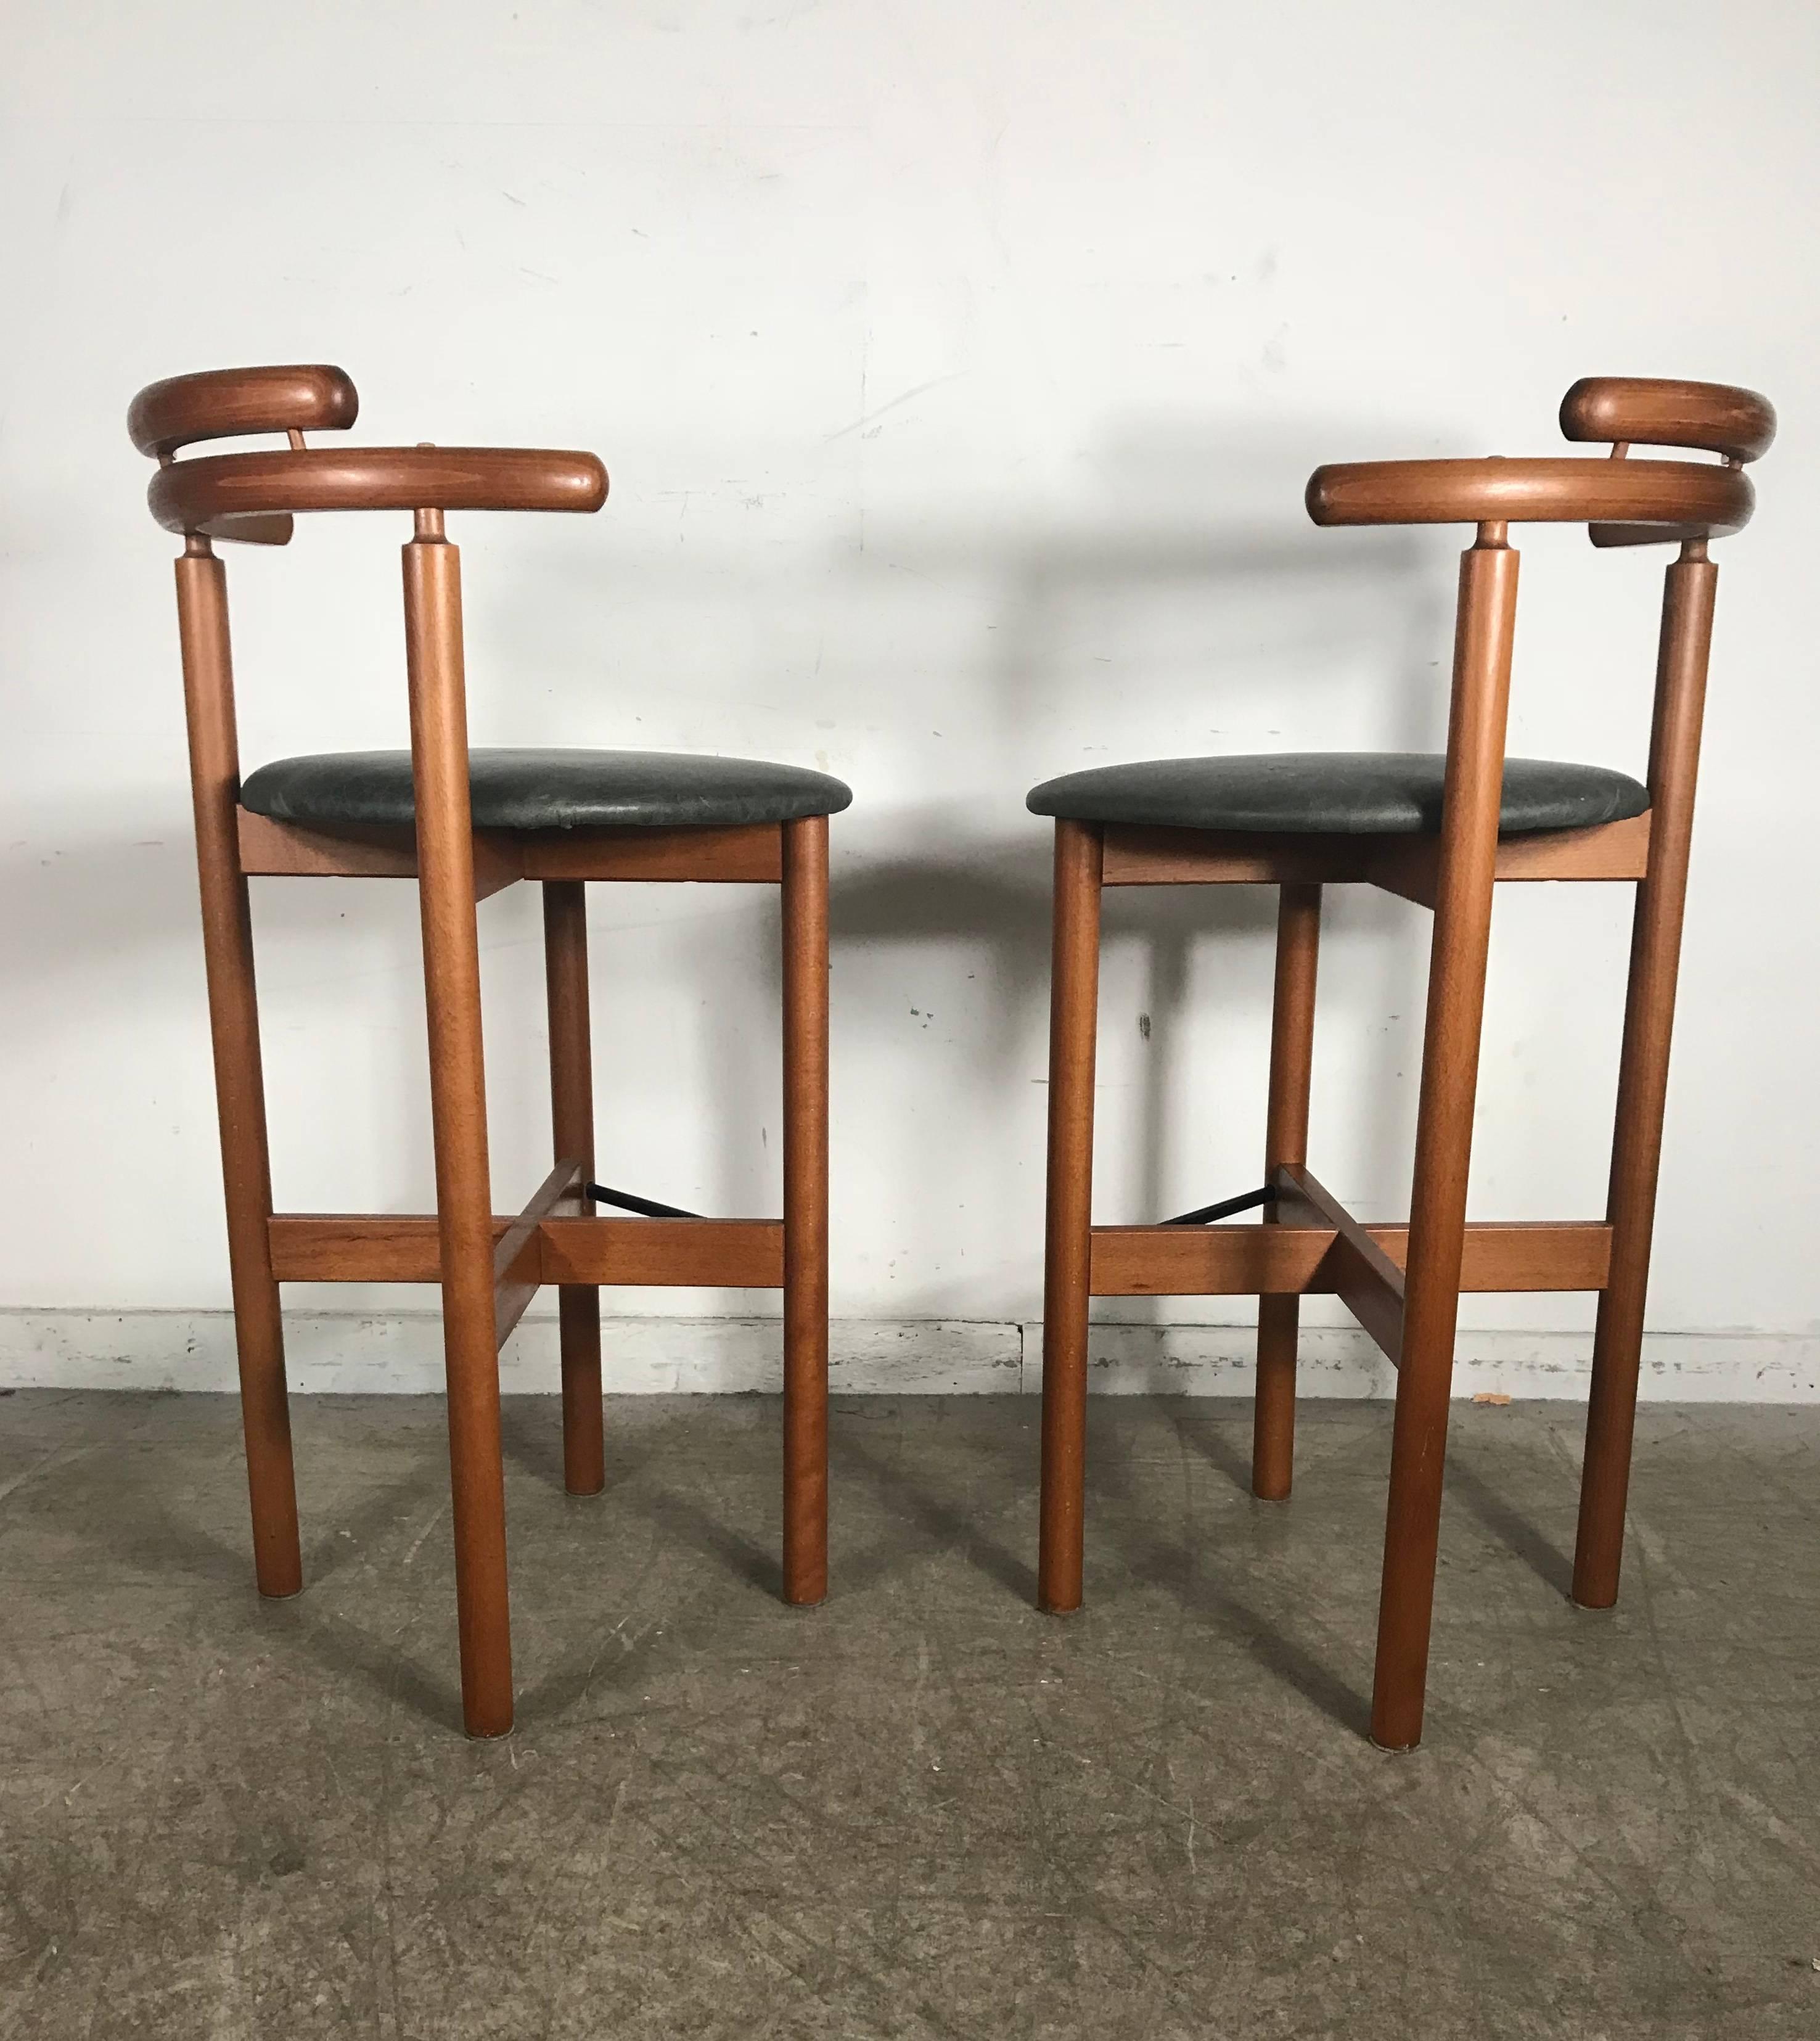 Scandinavian Modern Pair of Danish Bar or Counter Stools, Teak and Leather by Gangso Mobler